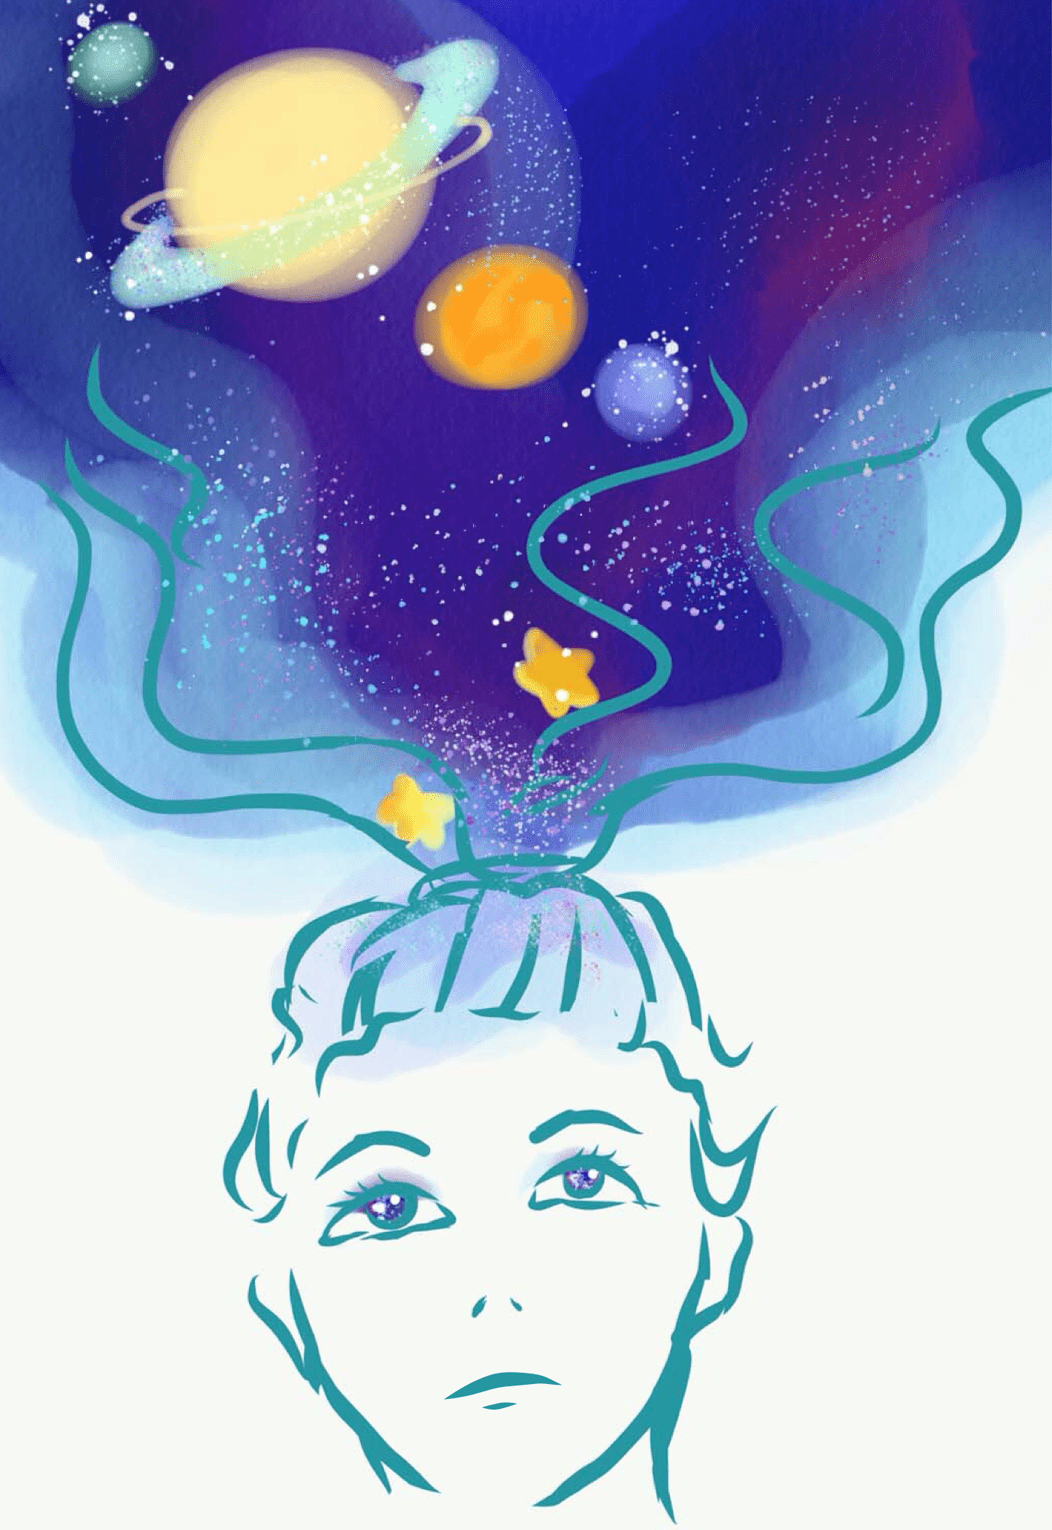 blue outline of person dreaming of planets